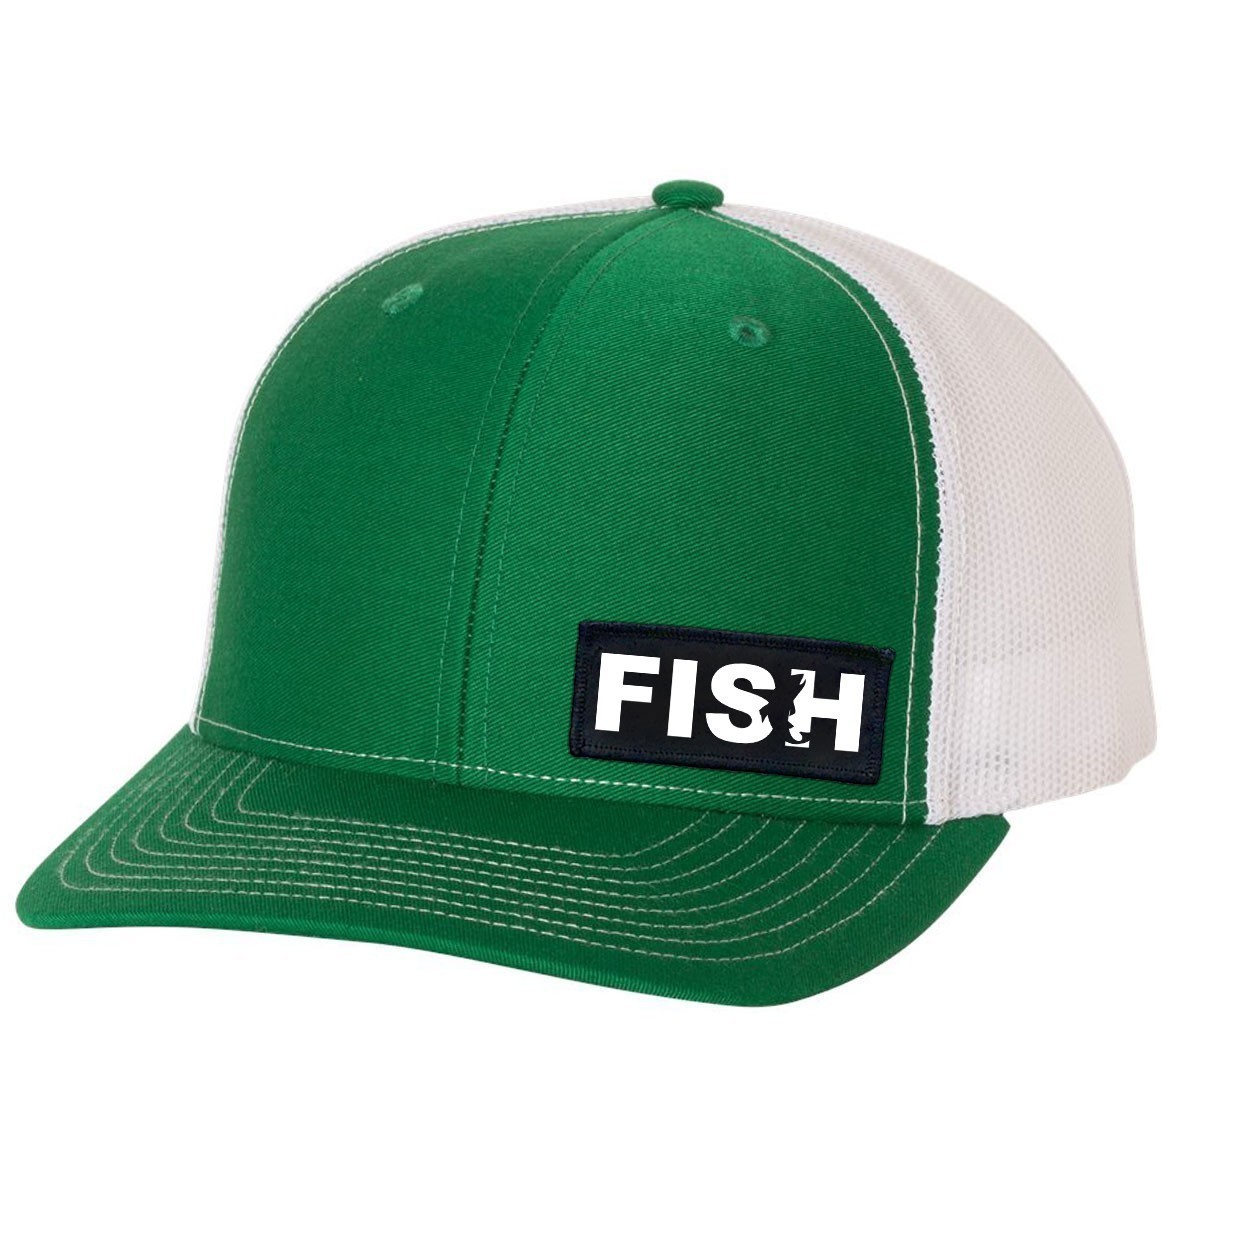 Fish Catch Logo Night Out Woven Patch Snapback Trucker Hat Green/White (White Logo)